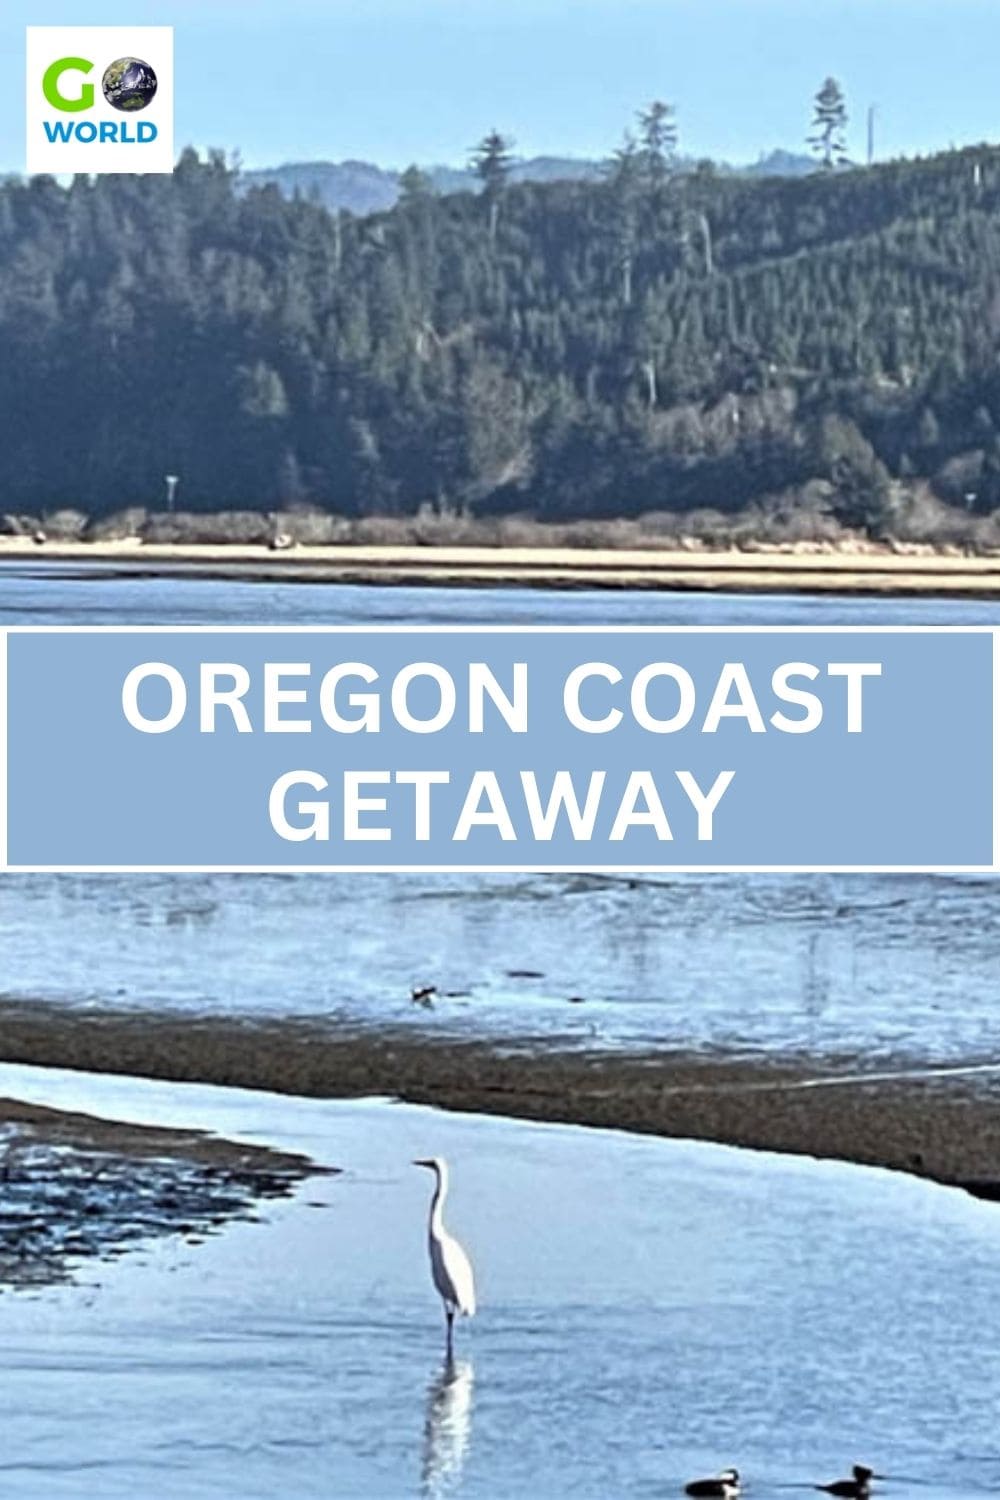 Relax and rejuvenate at the Salishan Coastal Lodge: a perfect choice for an Oregon Coast getaway with an array of activities and dining. #oregoncoast #oregontravel